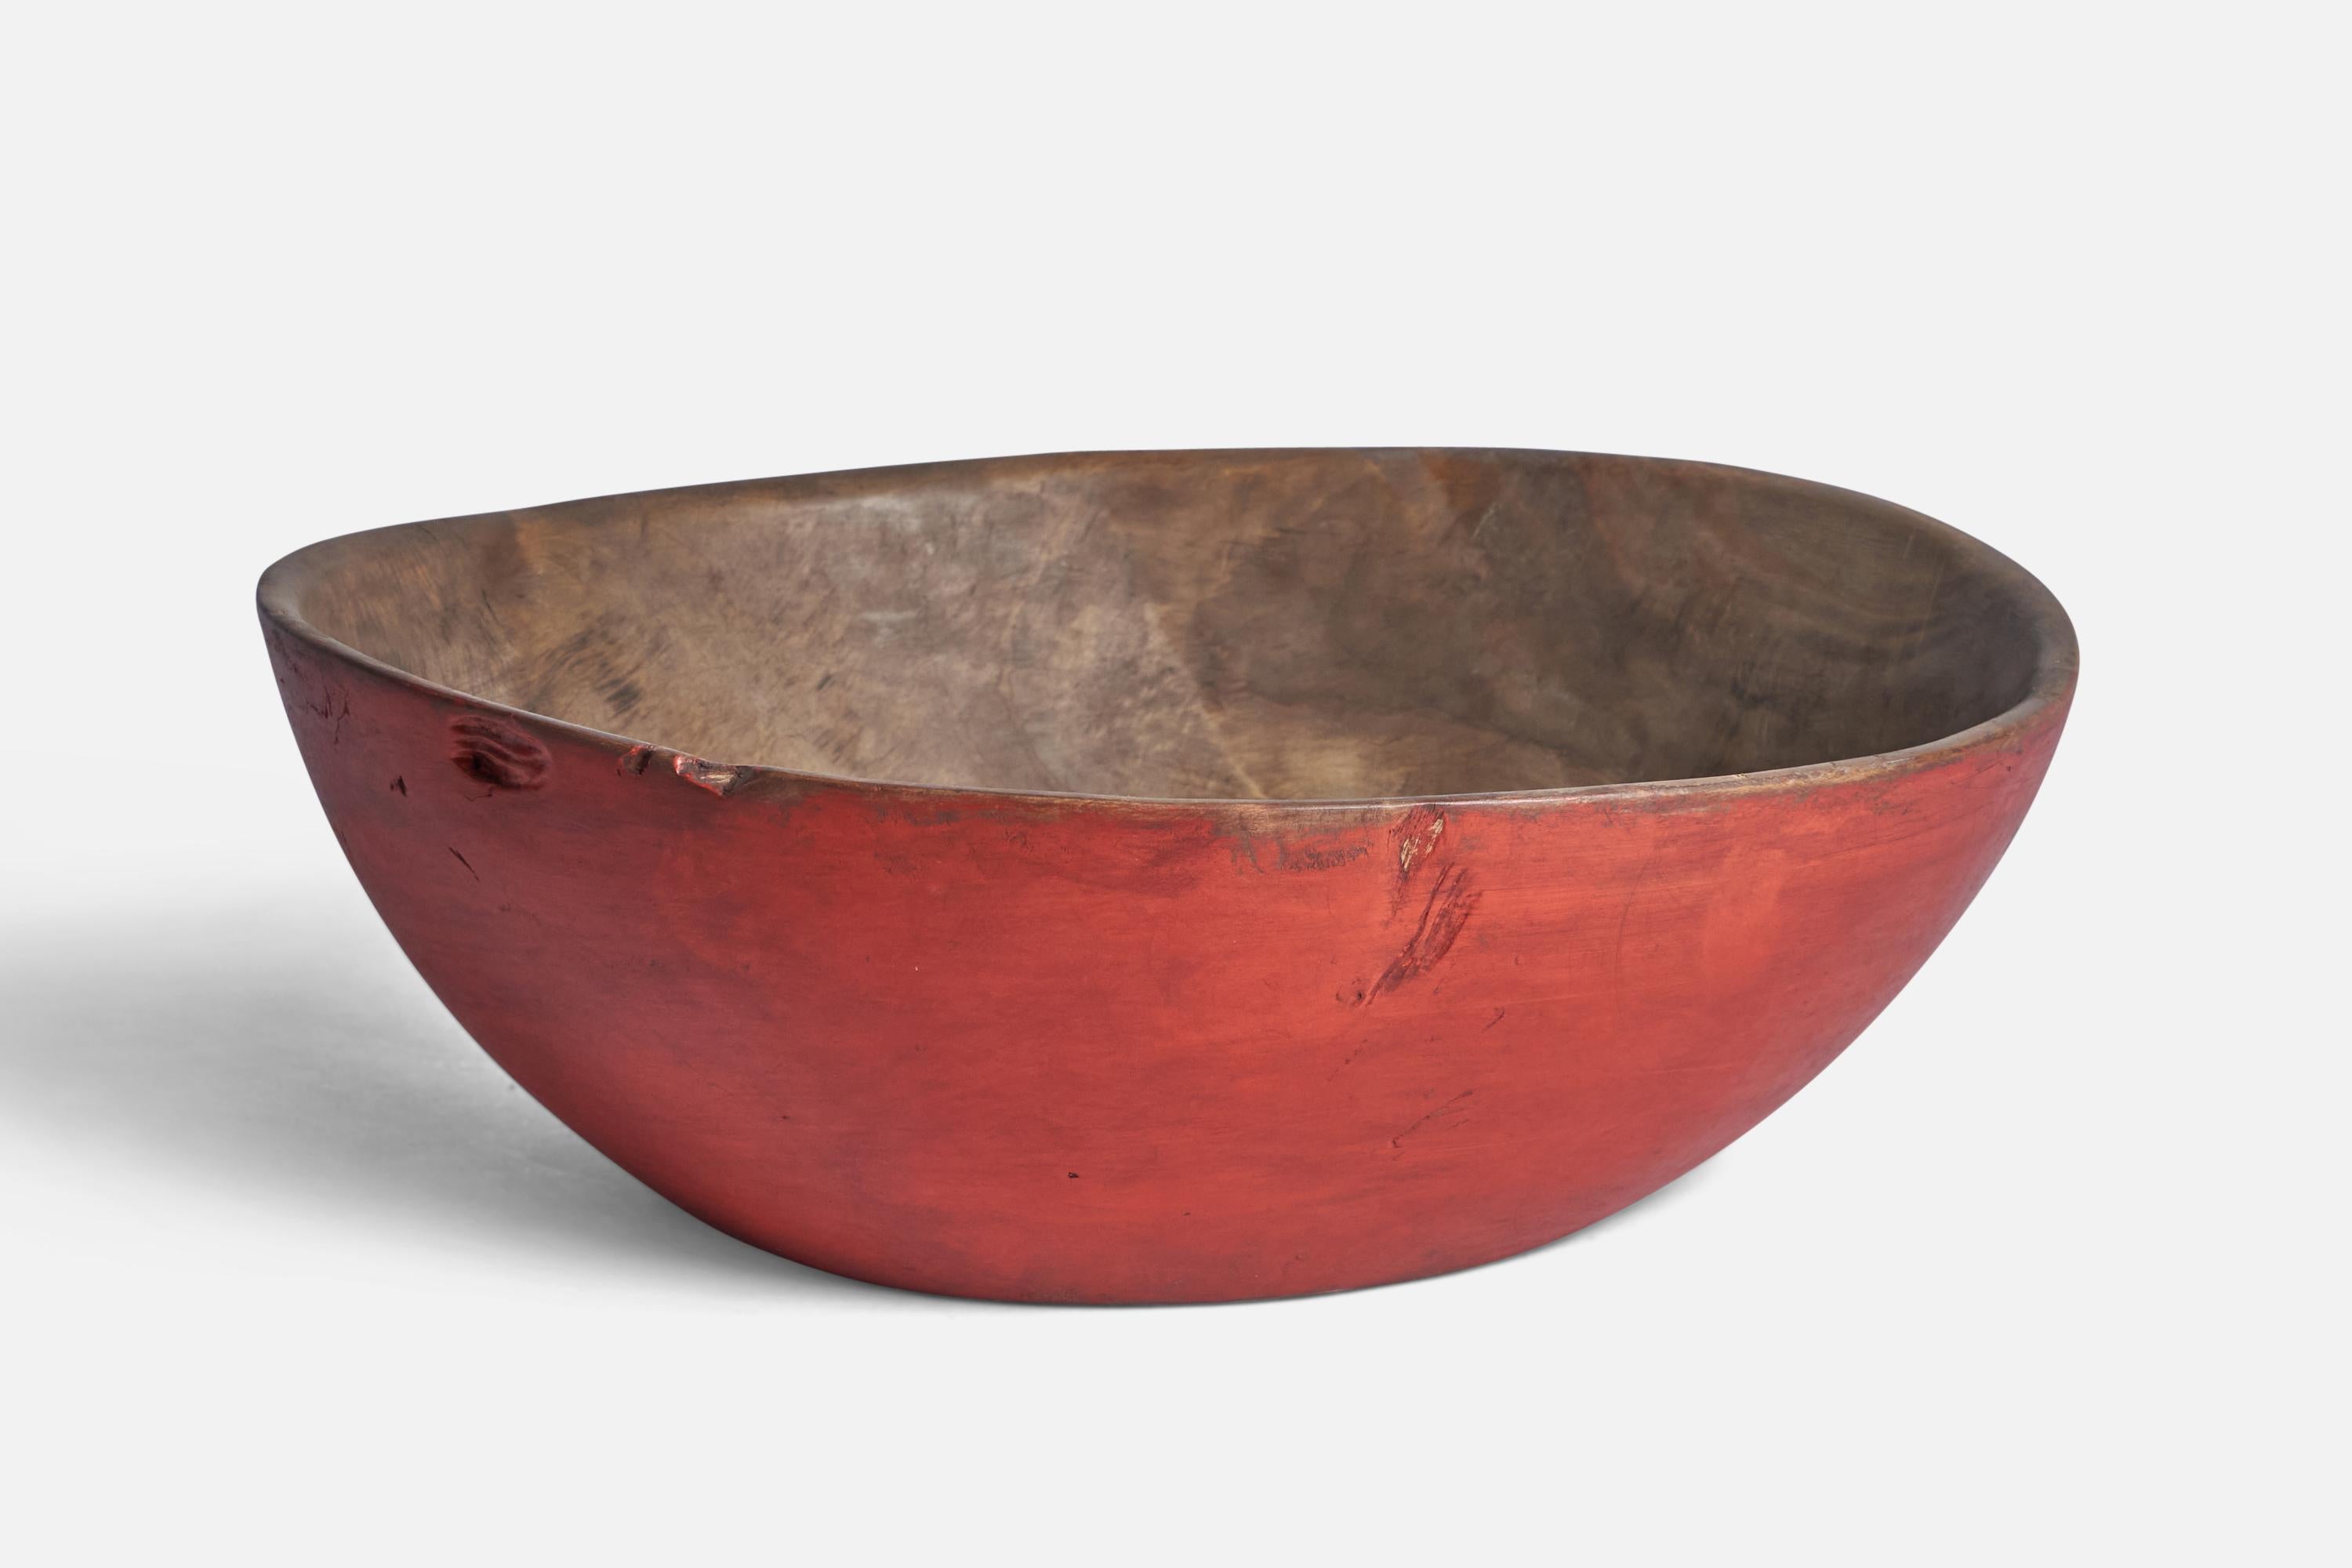 A red-painted wood bowl produced in Sweden, 19th Century.

